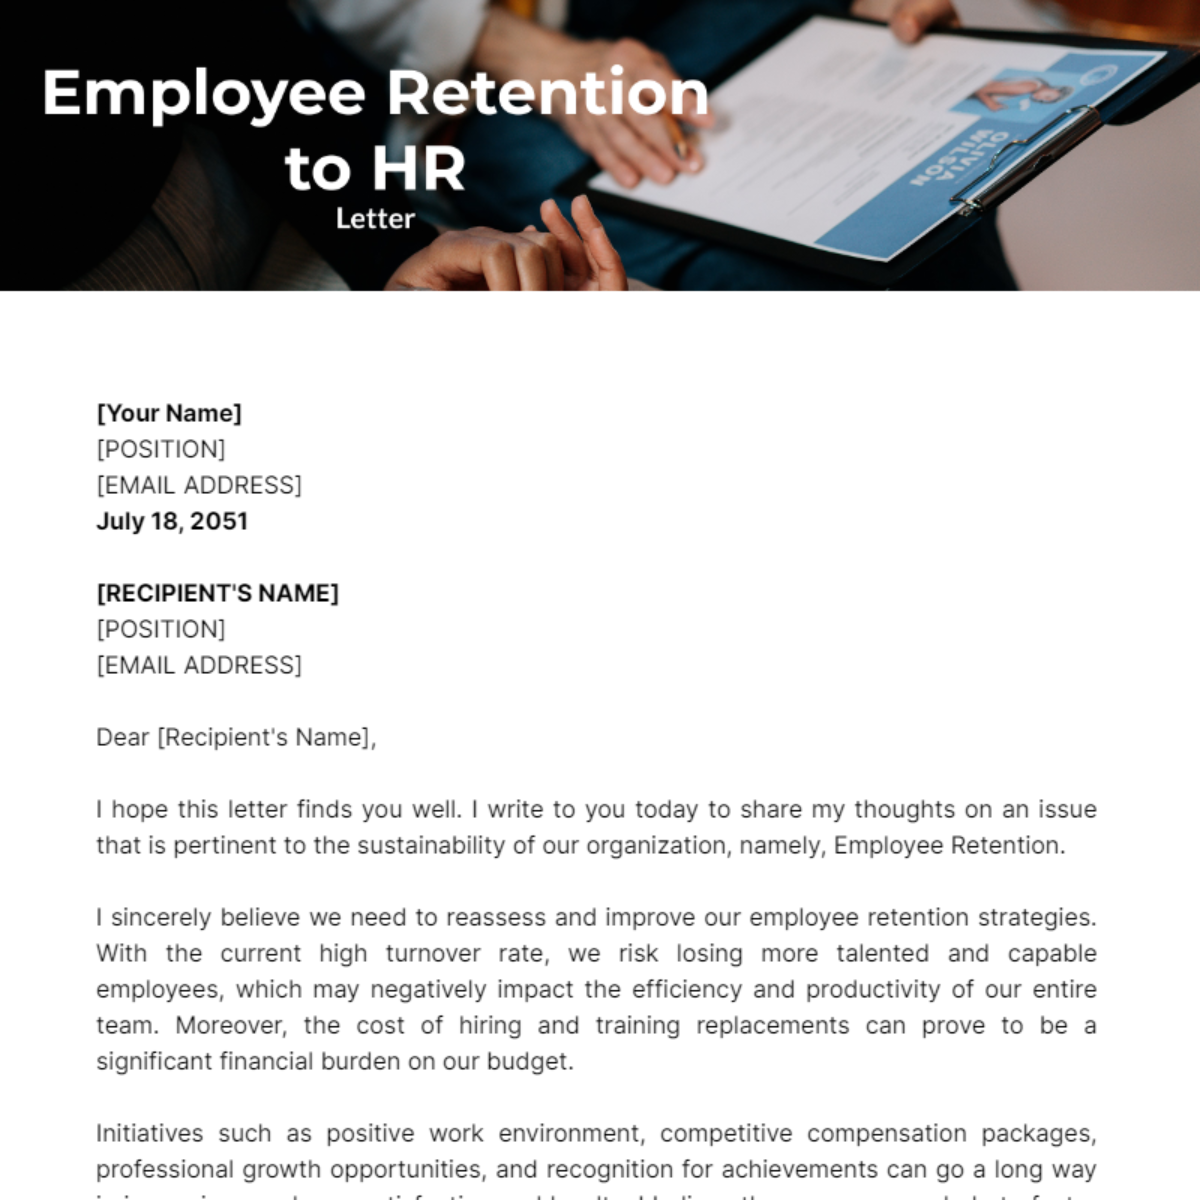 Employee Retention Letter to HR Template